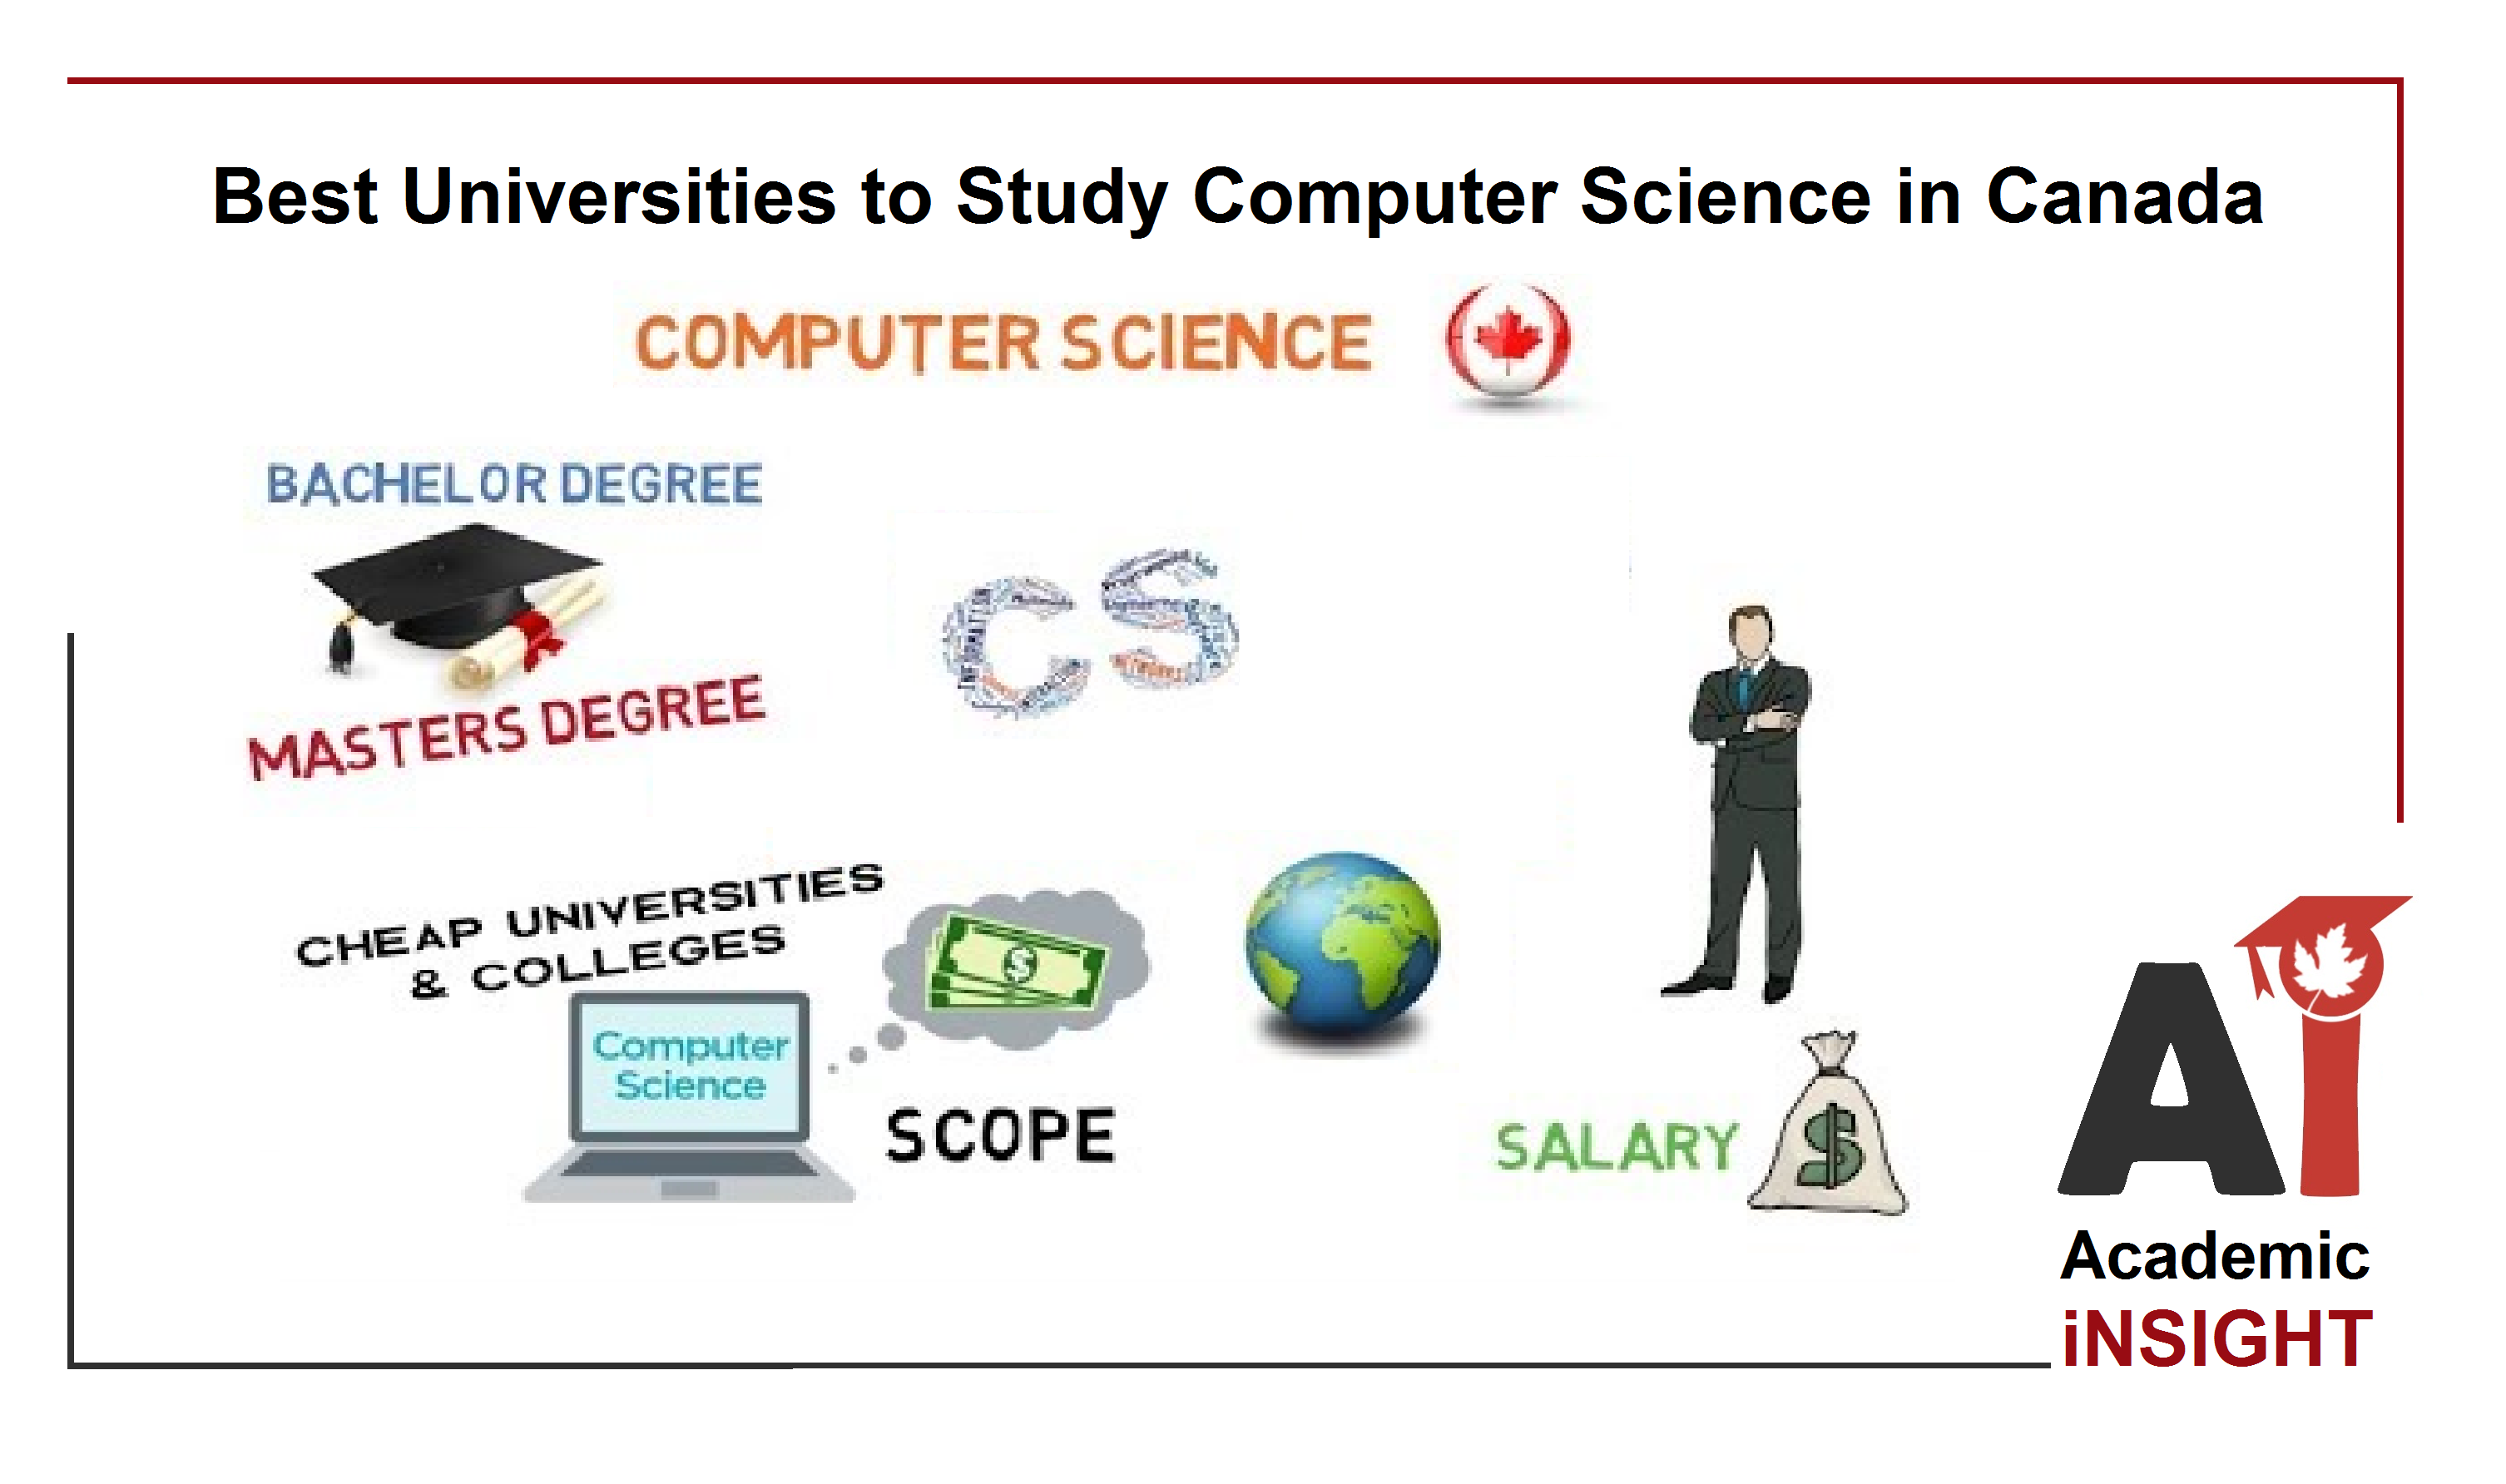 What are the Best Universities to Study Computer Science in Canada?